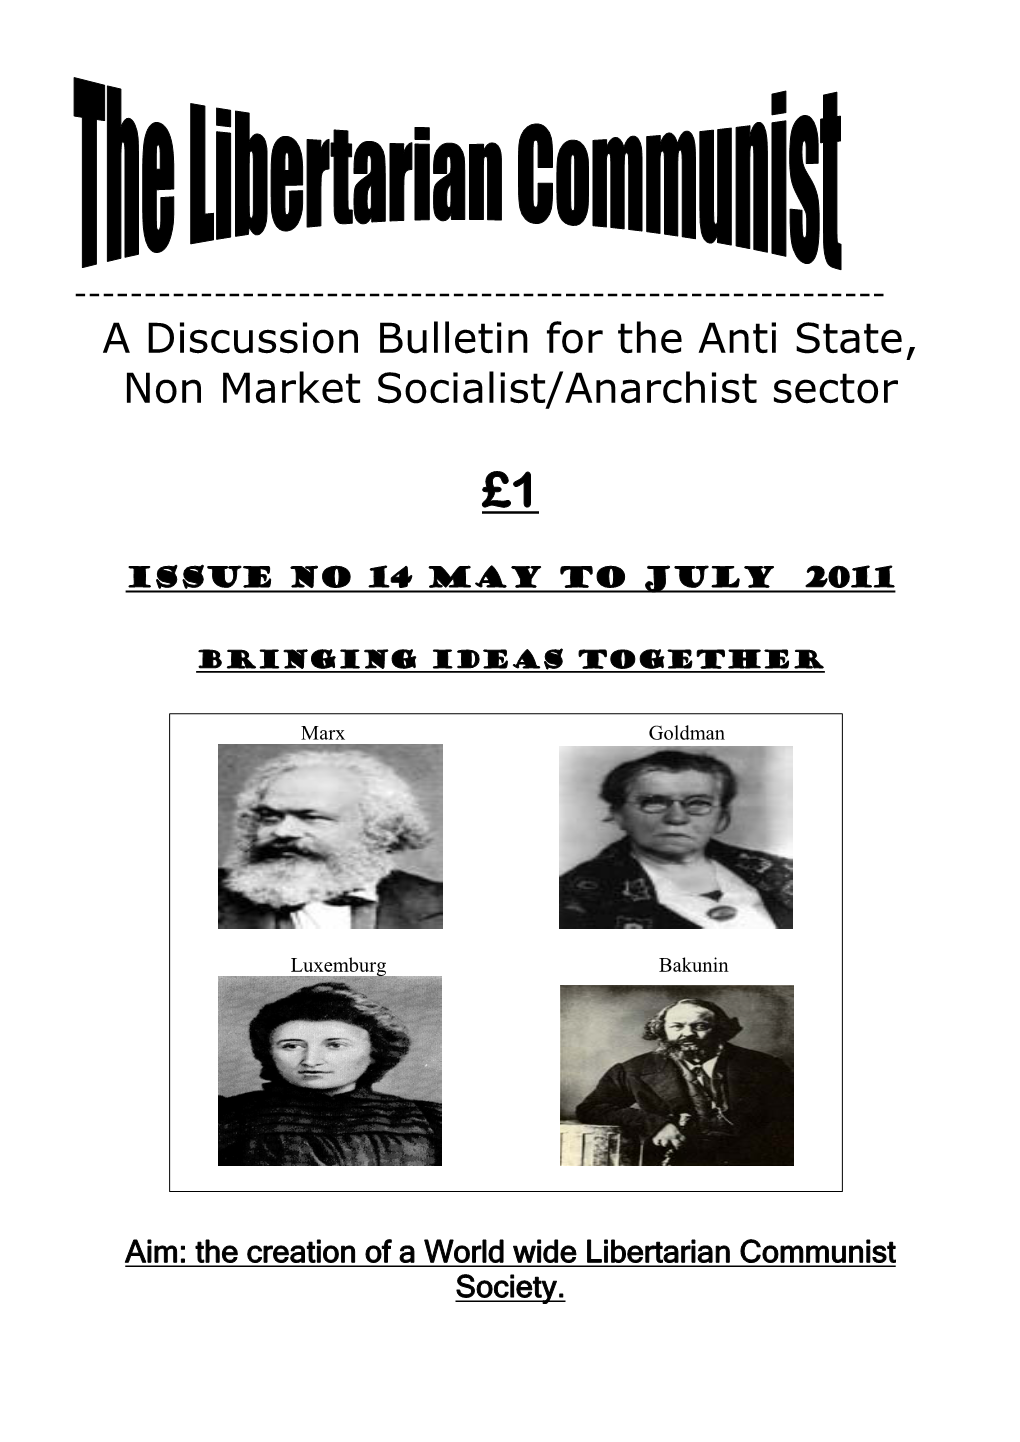 A Discussion Bulletin for the Anti State, Non Market Socialist/Anarchist Sector